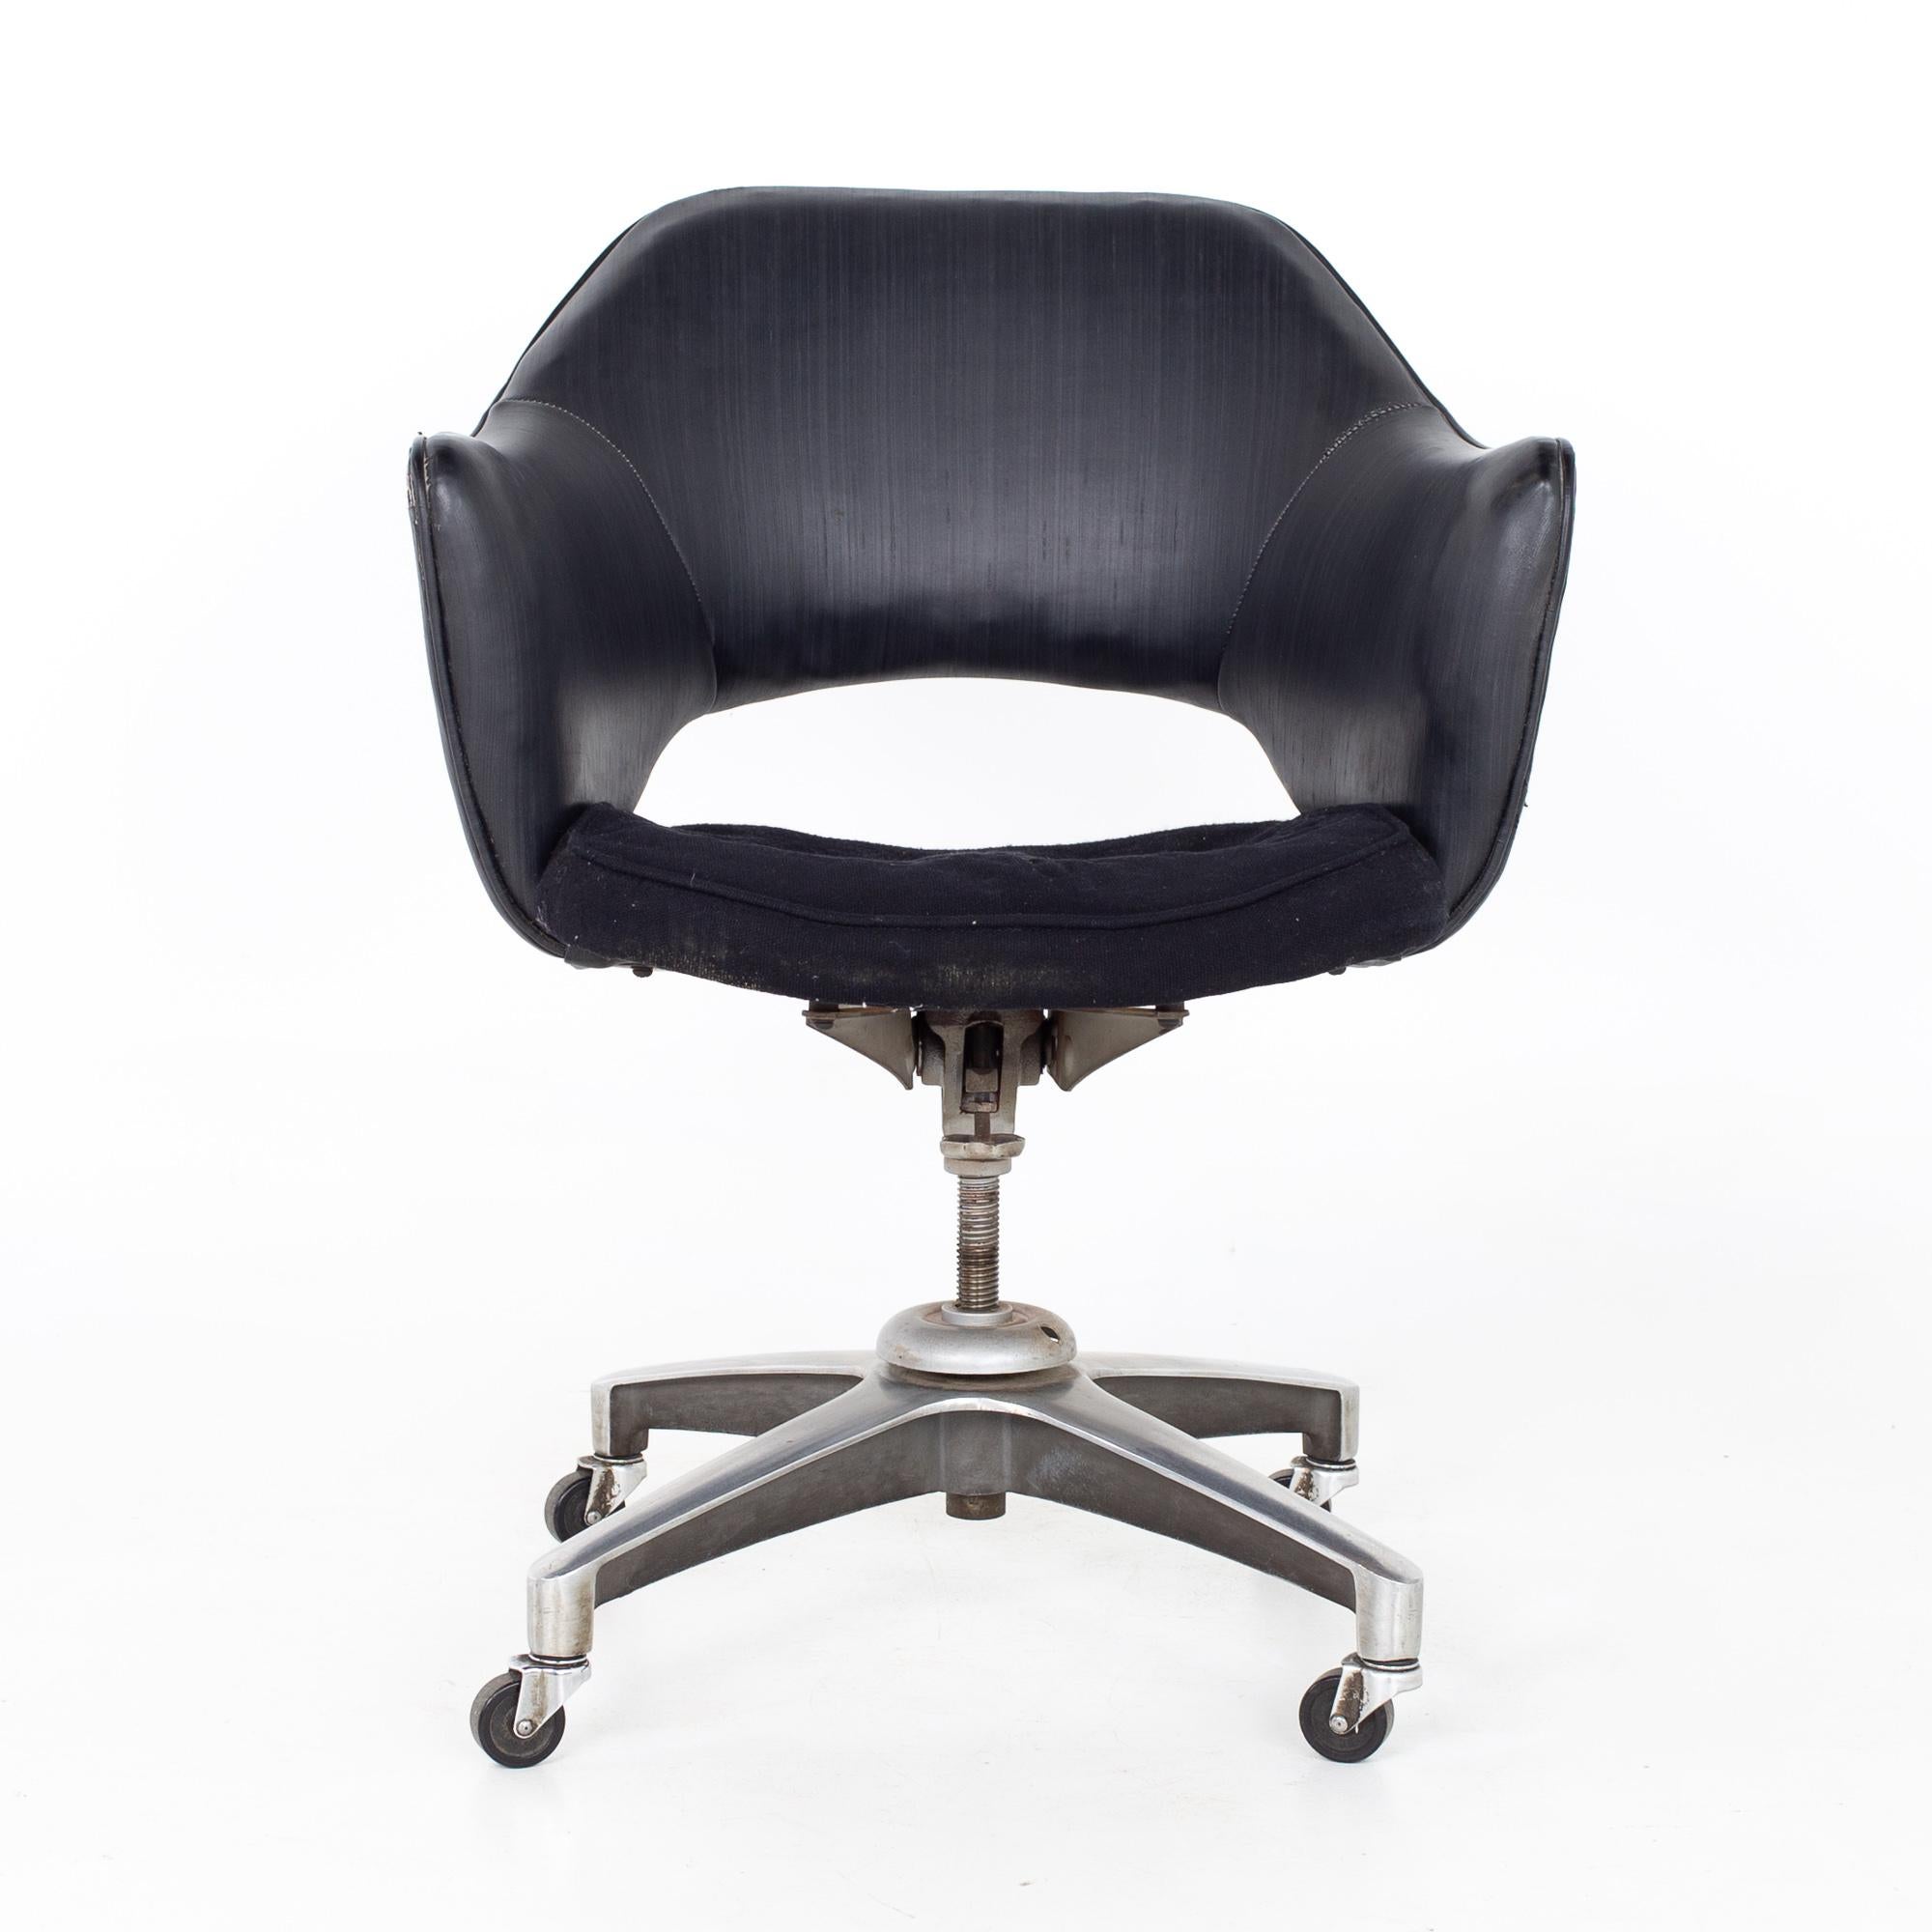 Saarinen style mid-century wheeled desk chair.

This chair measures: 25 wide x 23.25 deep x 33.25 inches high, with a seat height of 20 and arm height of 27.75 inches; the chair clearance is 27.25 inches.

All pieces of furniture can be had in